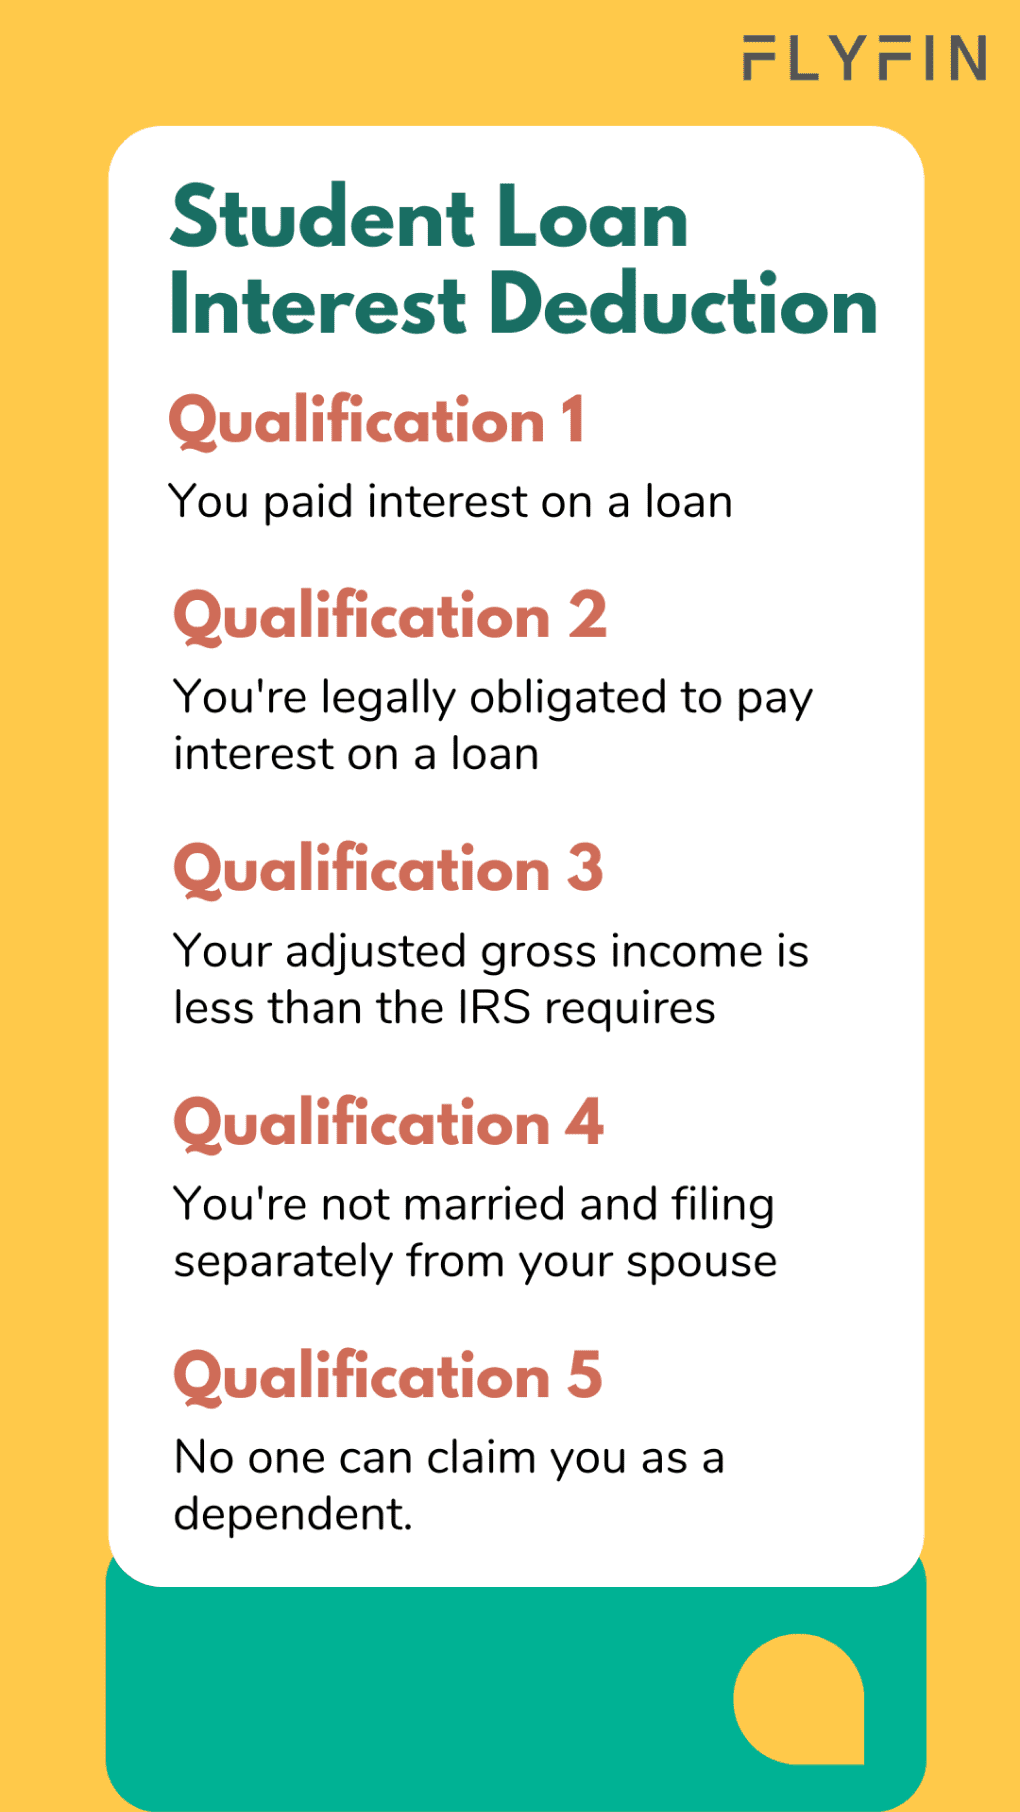 Image explaining qualifications for student loan interest deduction, including payment of interest, legal obligation, income level, marital status, and dependent status. No mention of self-employment, 1099, freelancer, or taxes.